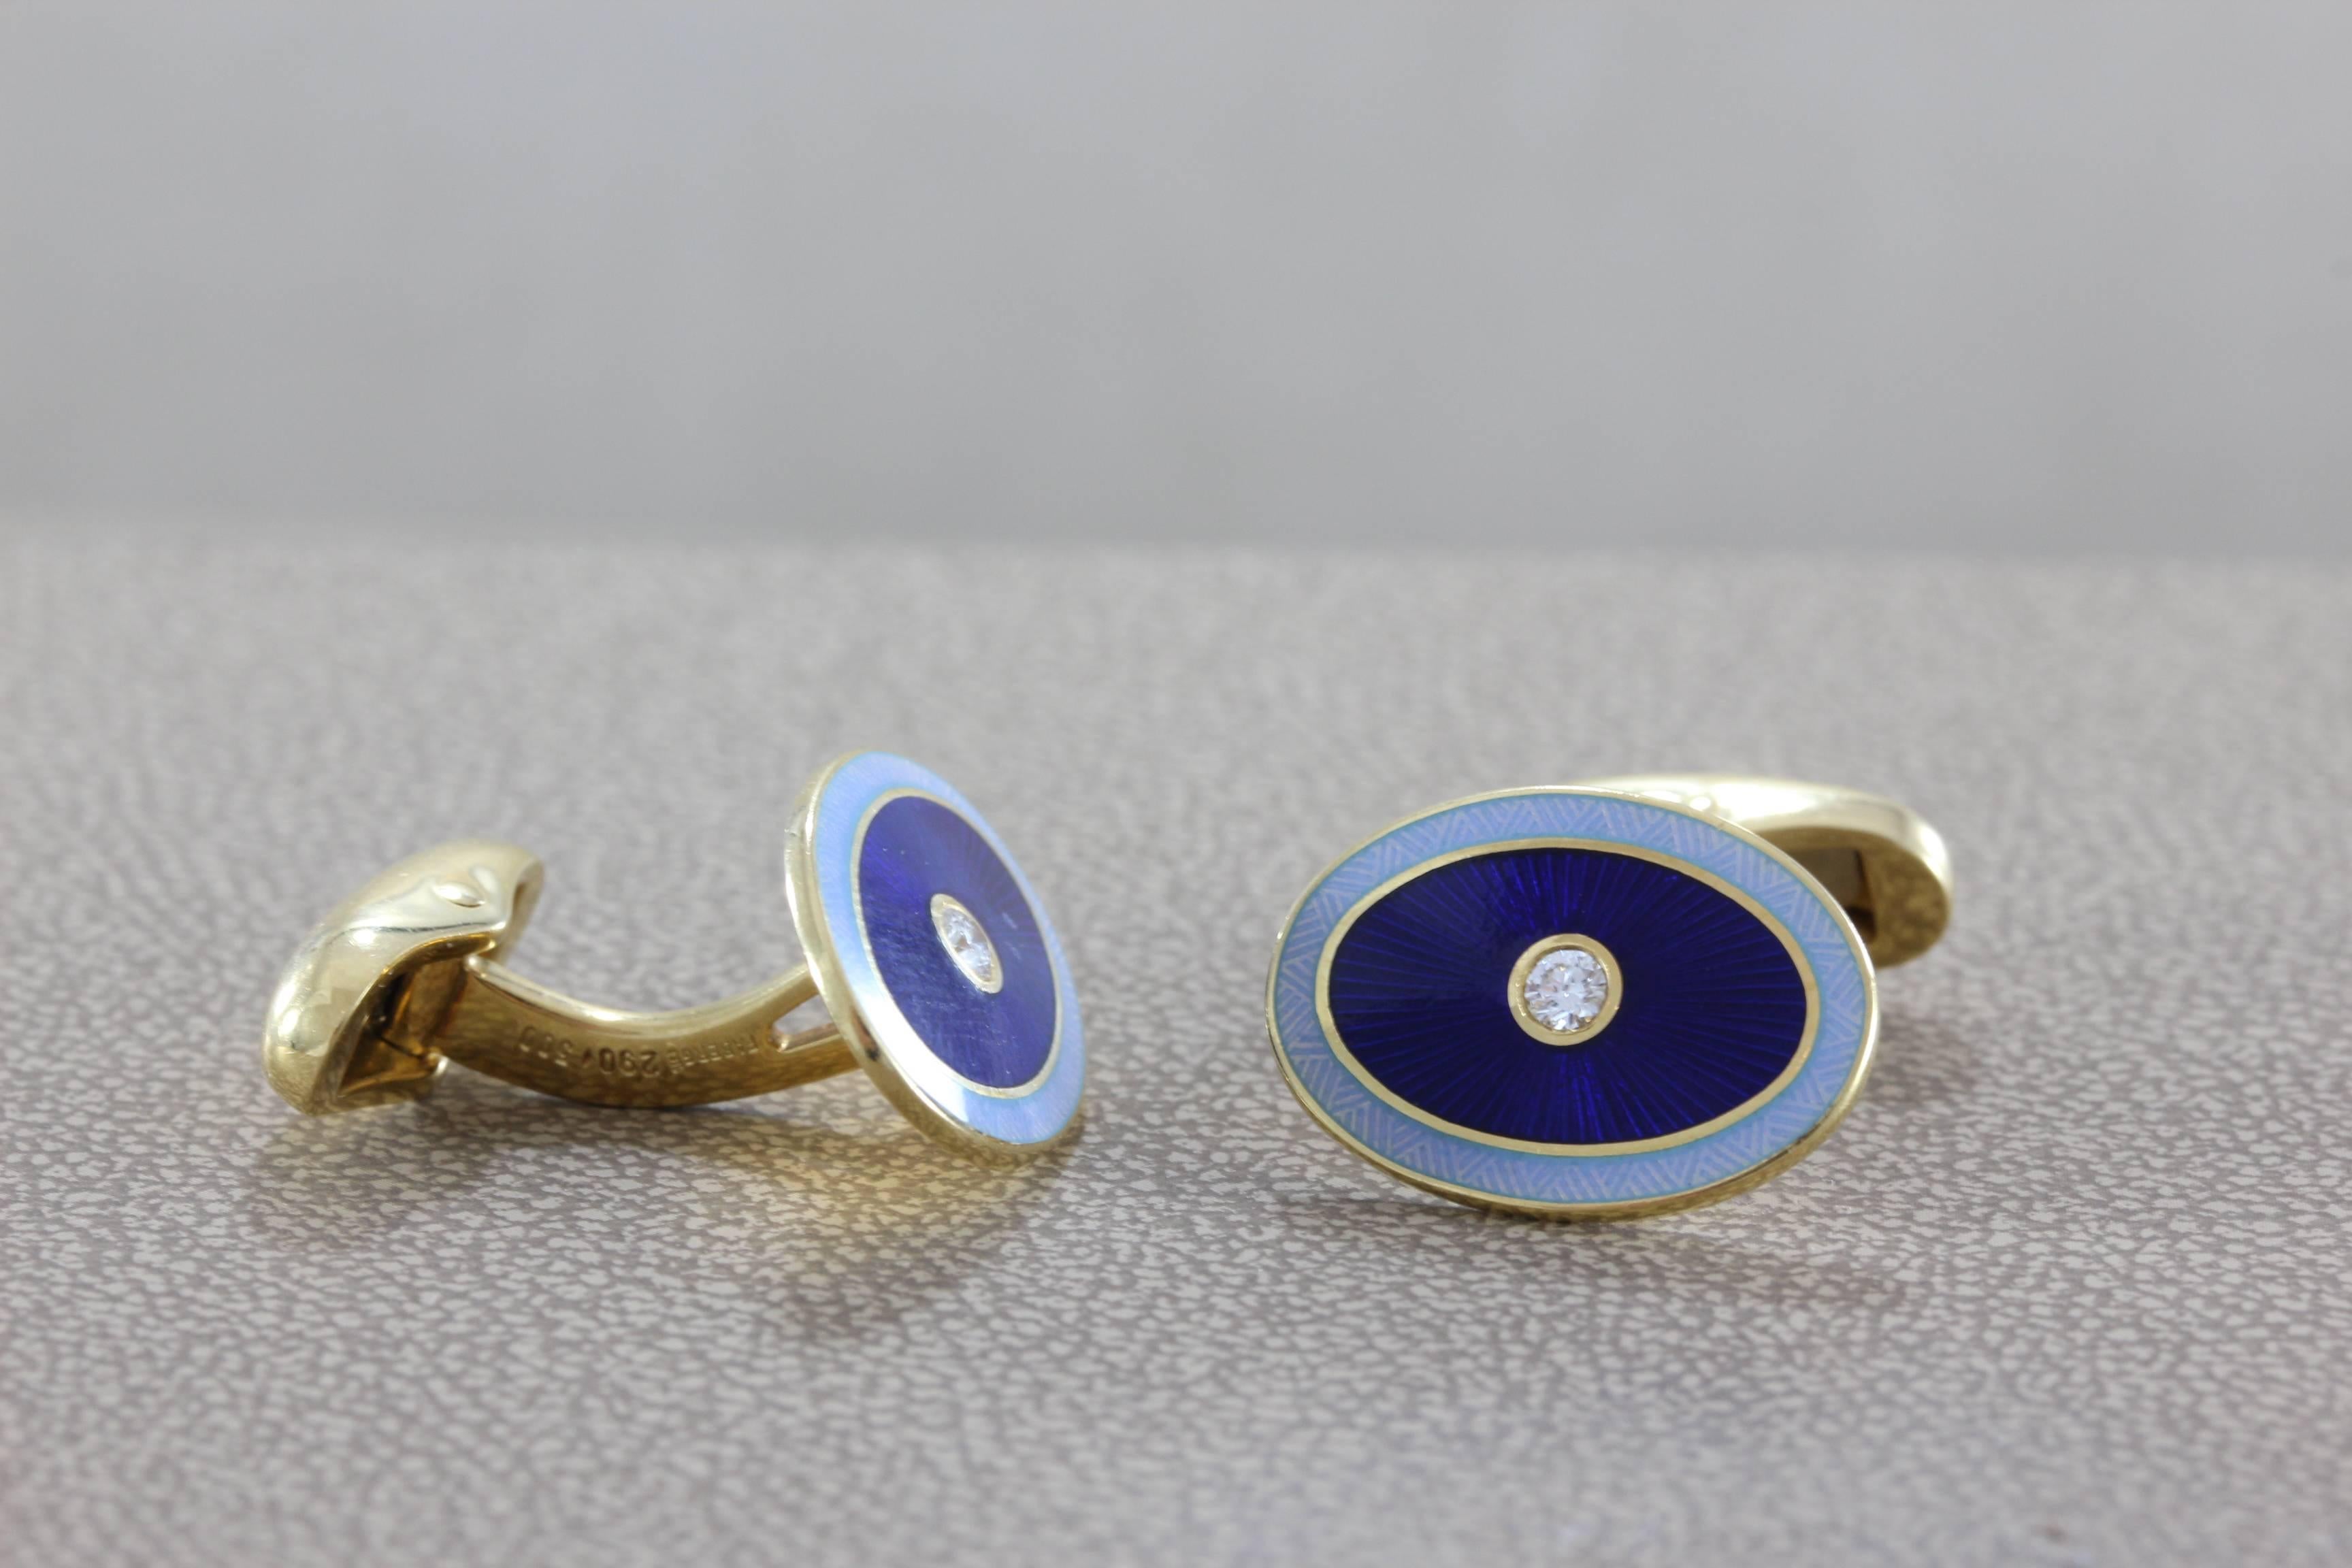 A pair of modern Fabergé cufflinks made in Germany featuring world class enamel as seen in the classic imperial Russian pieces. A round cut diamond centers each cuff, set in 18K yellow gold. (minor damage to enamel on one cuff)